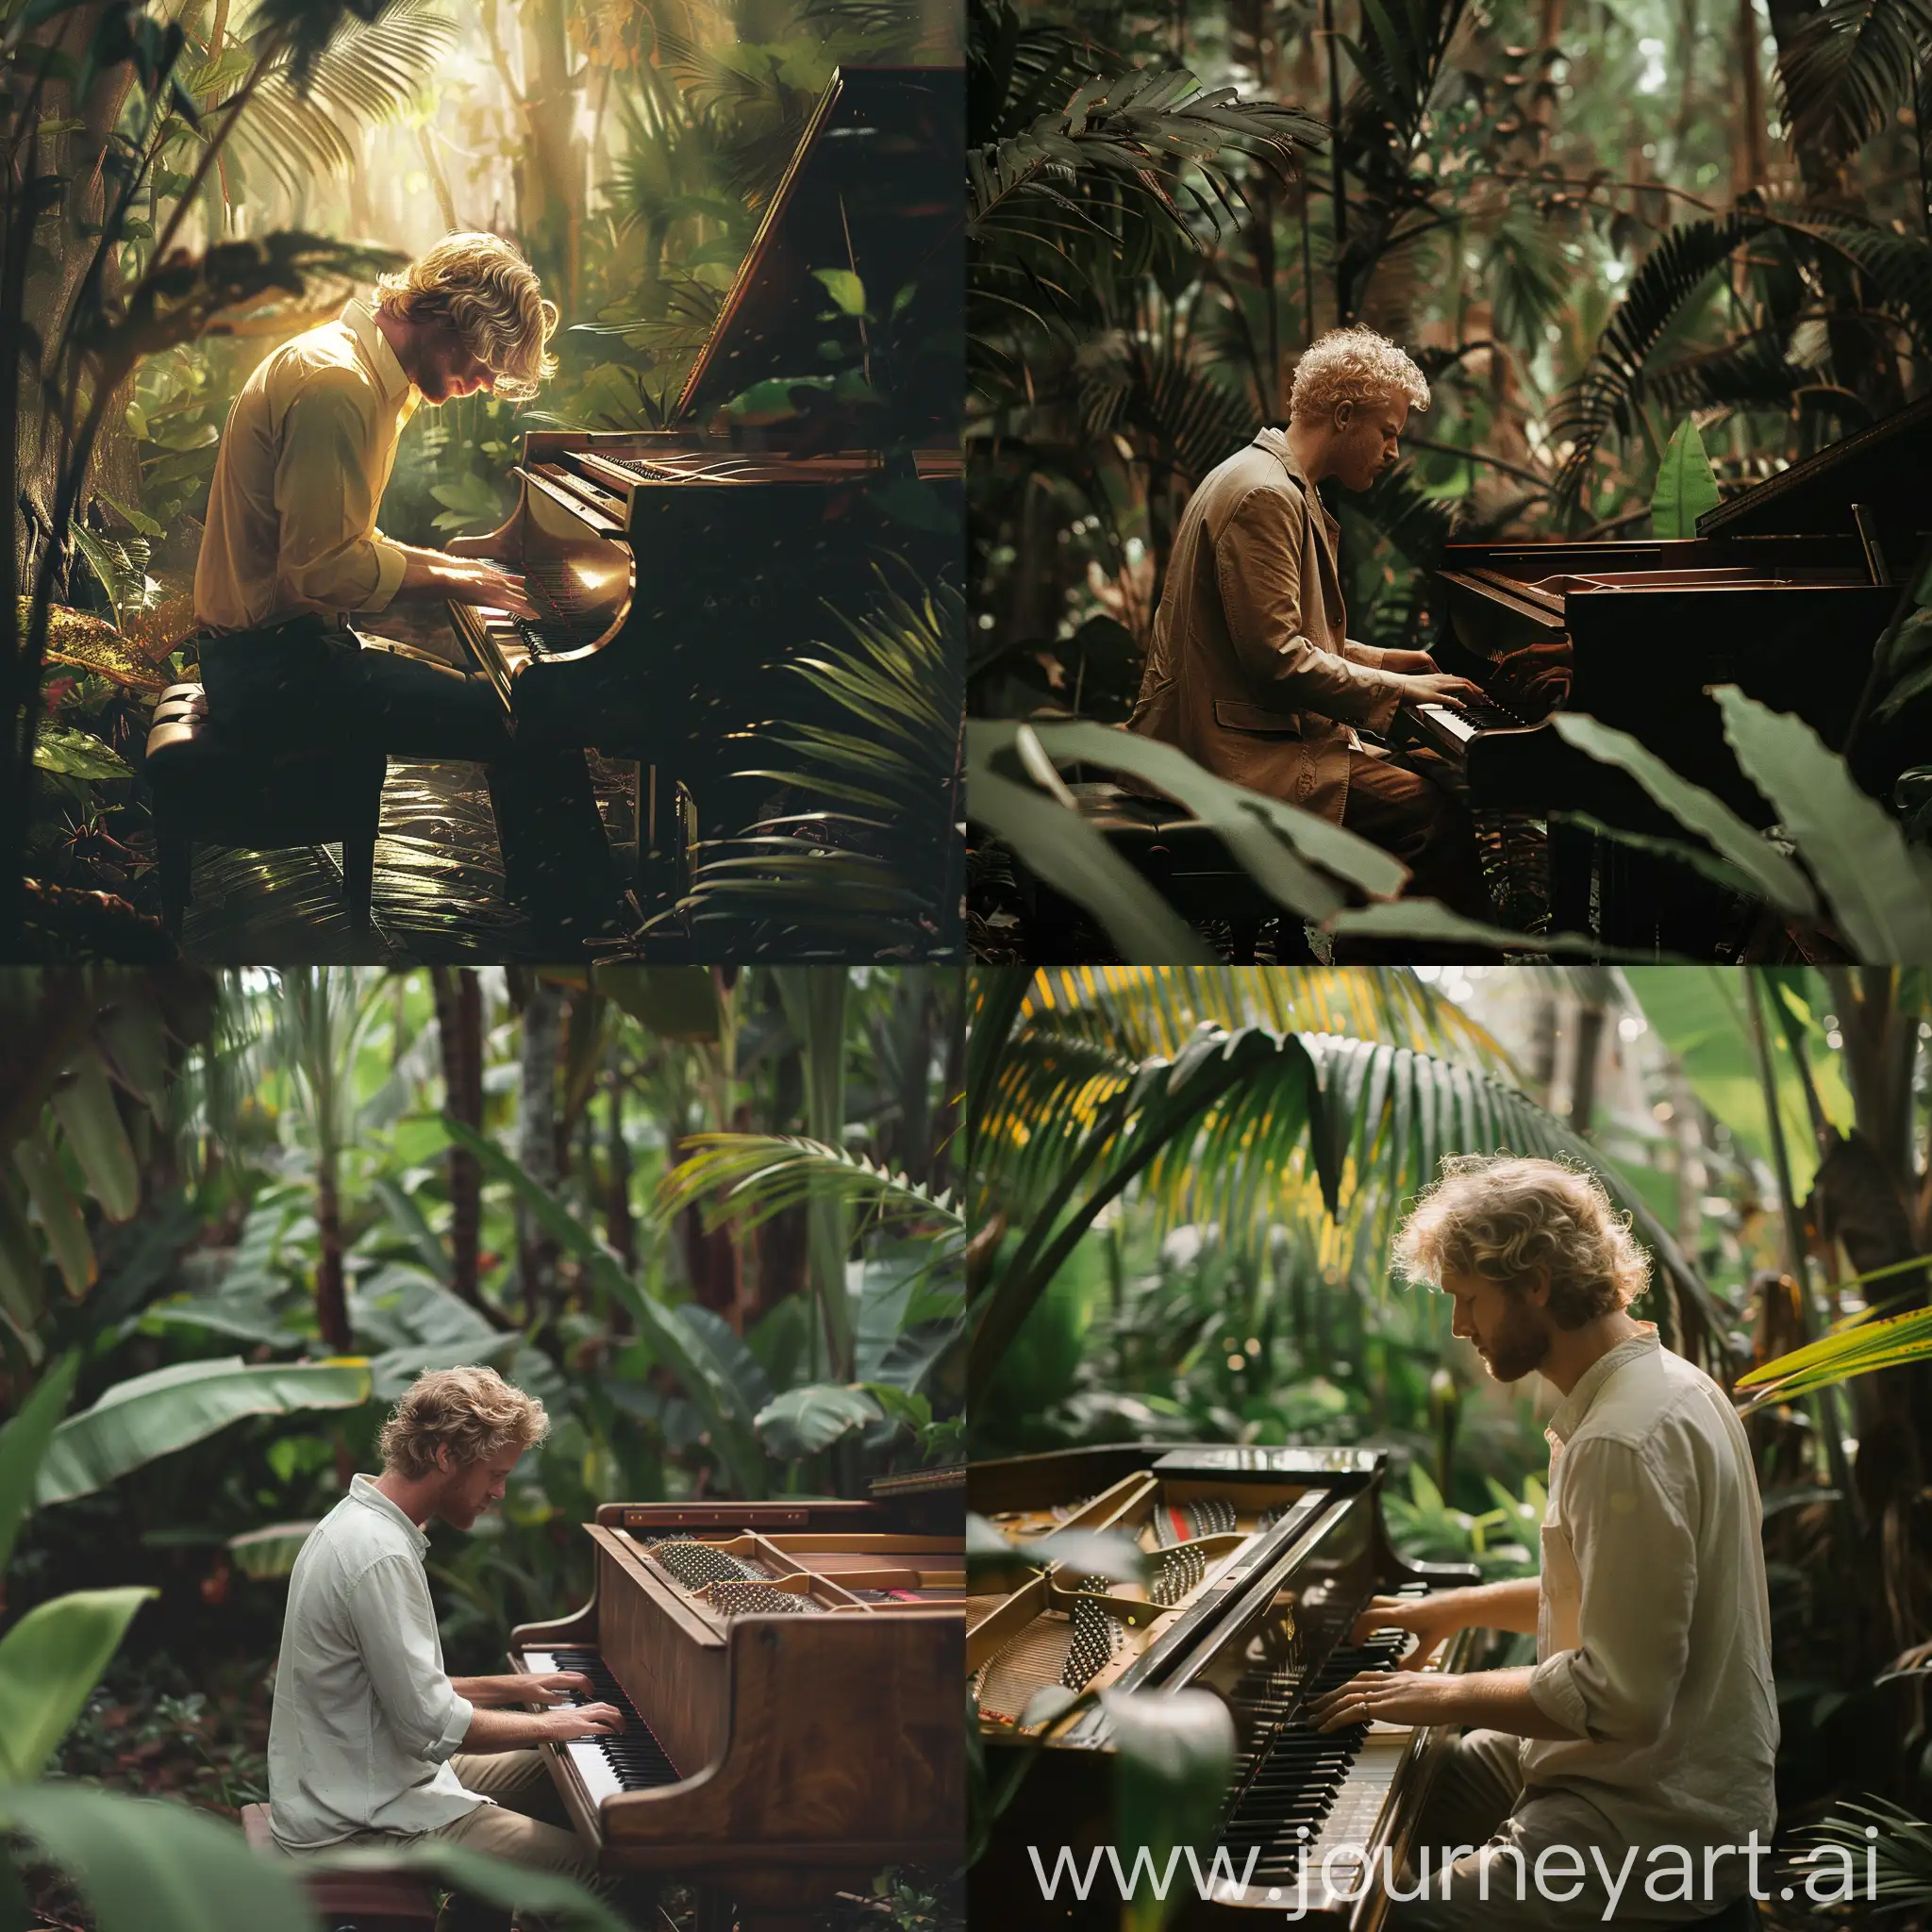 man with a blond hair plaing in piano in a jungel
